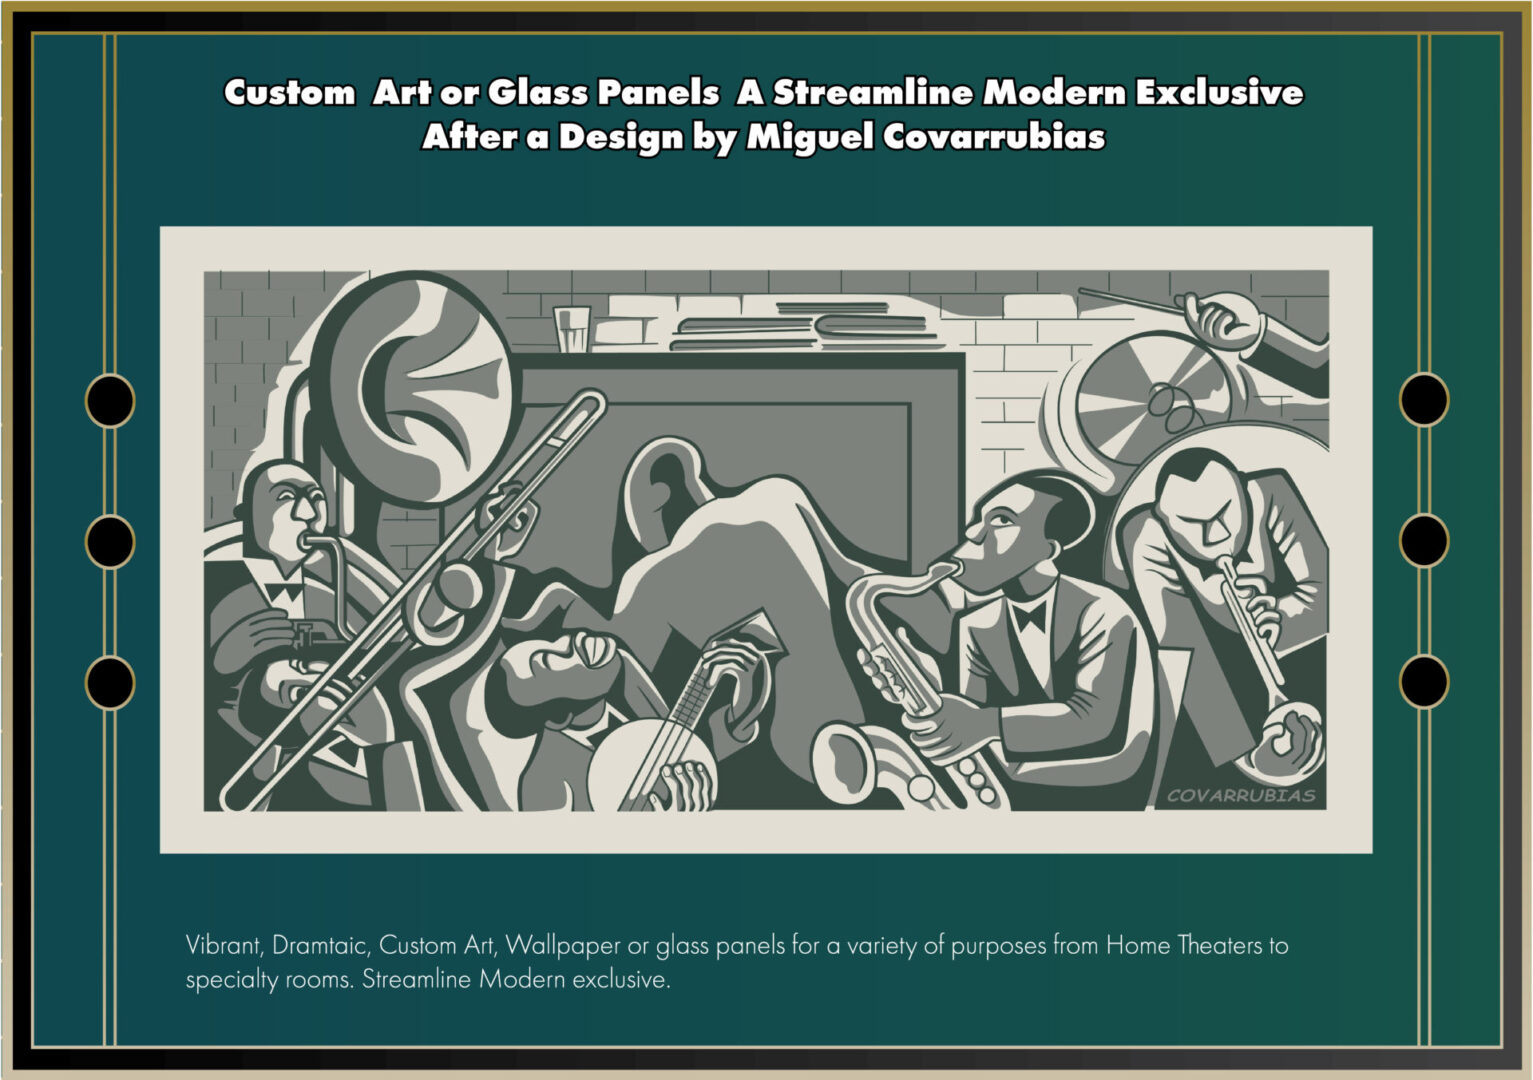 Jazz musical symphony design by Miguel Covarrubias